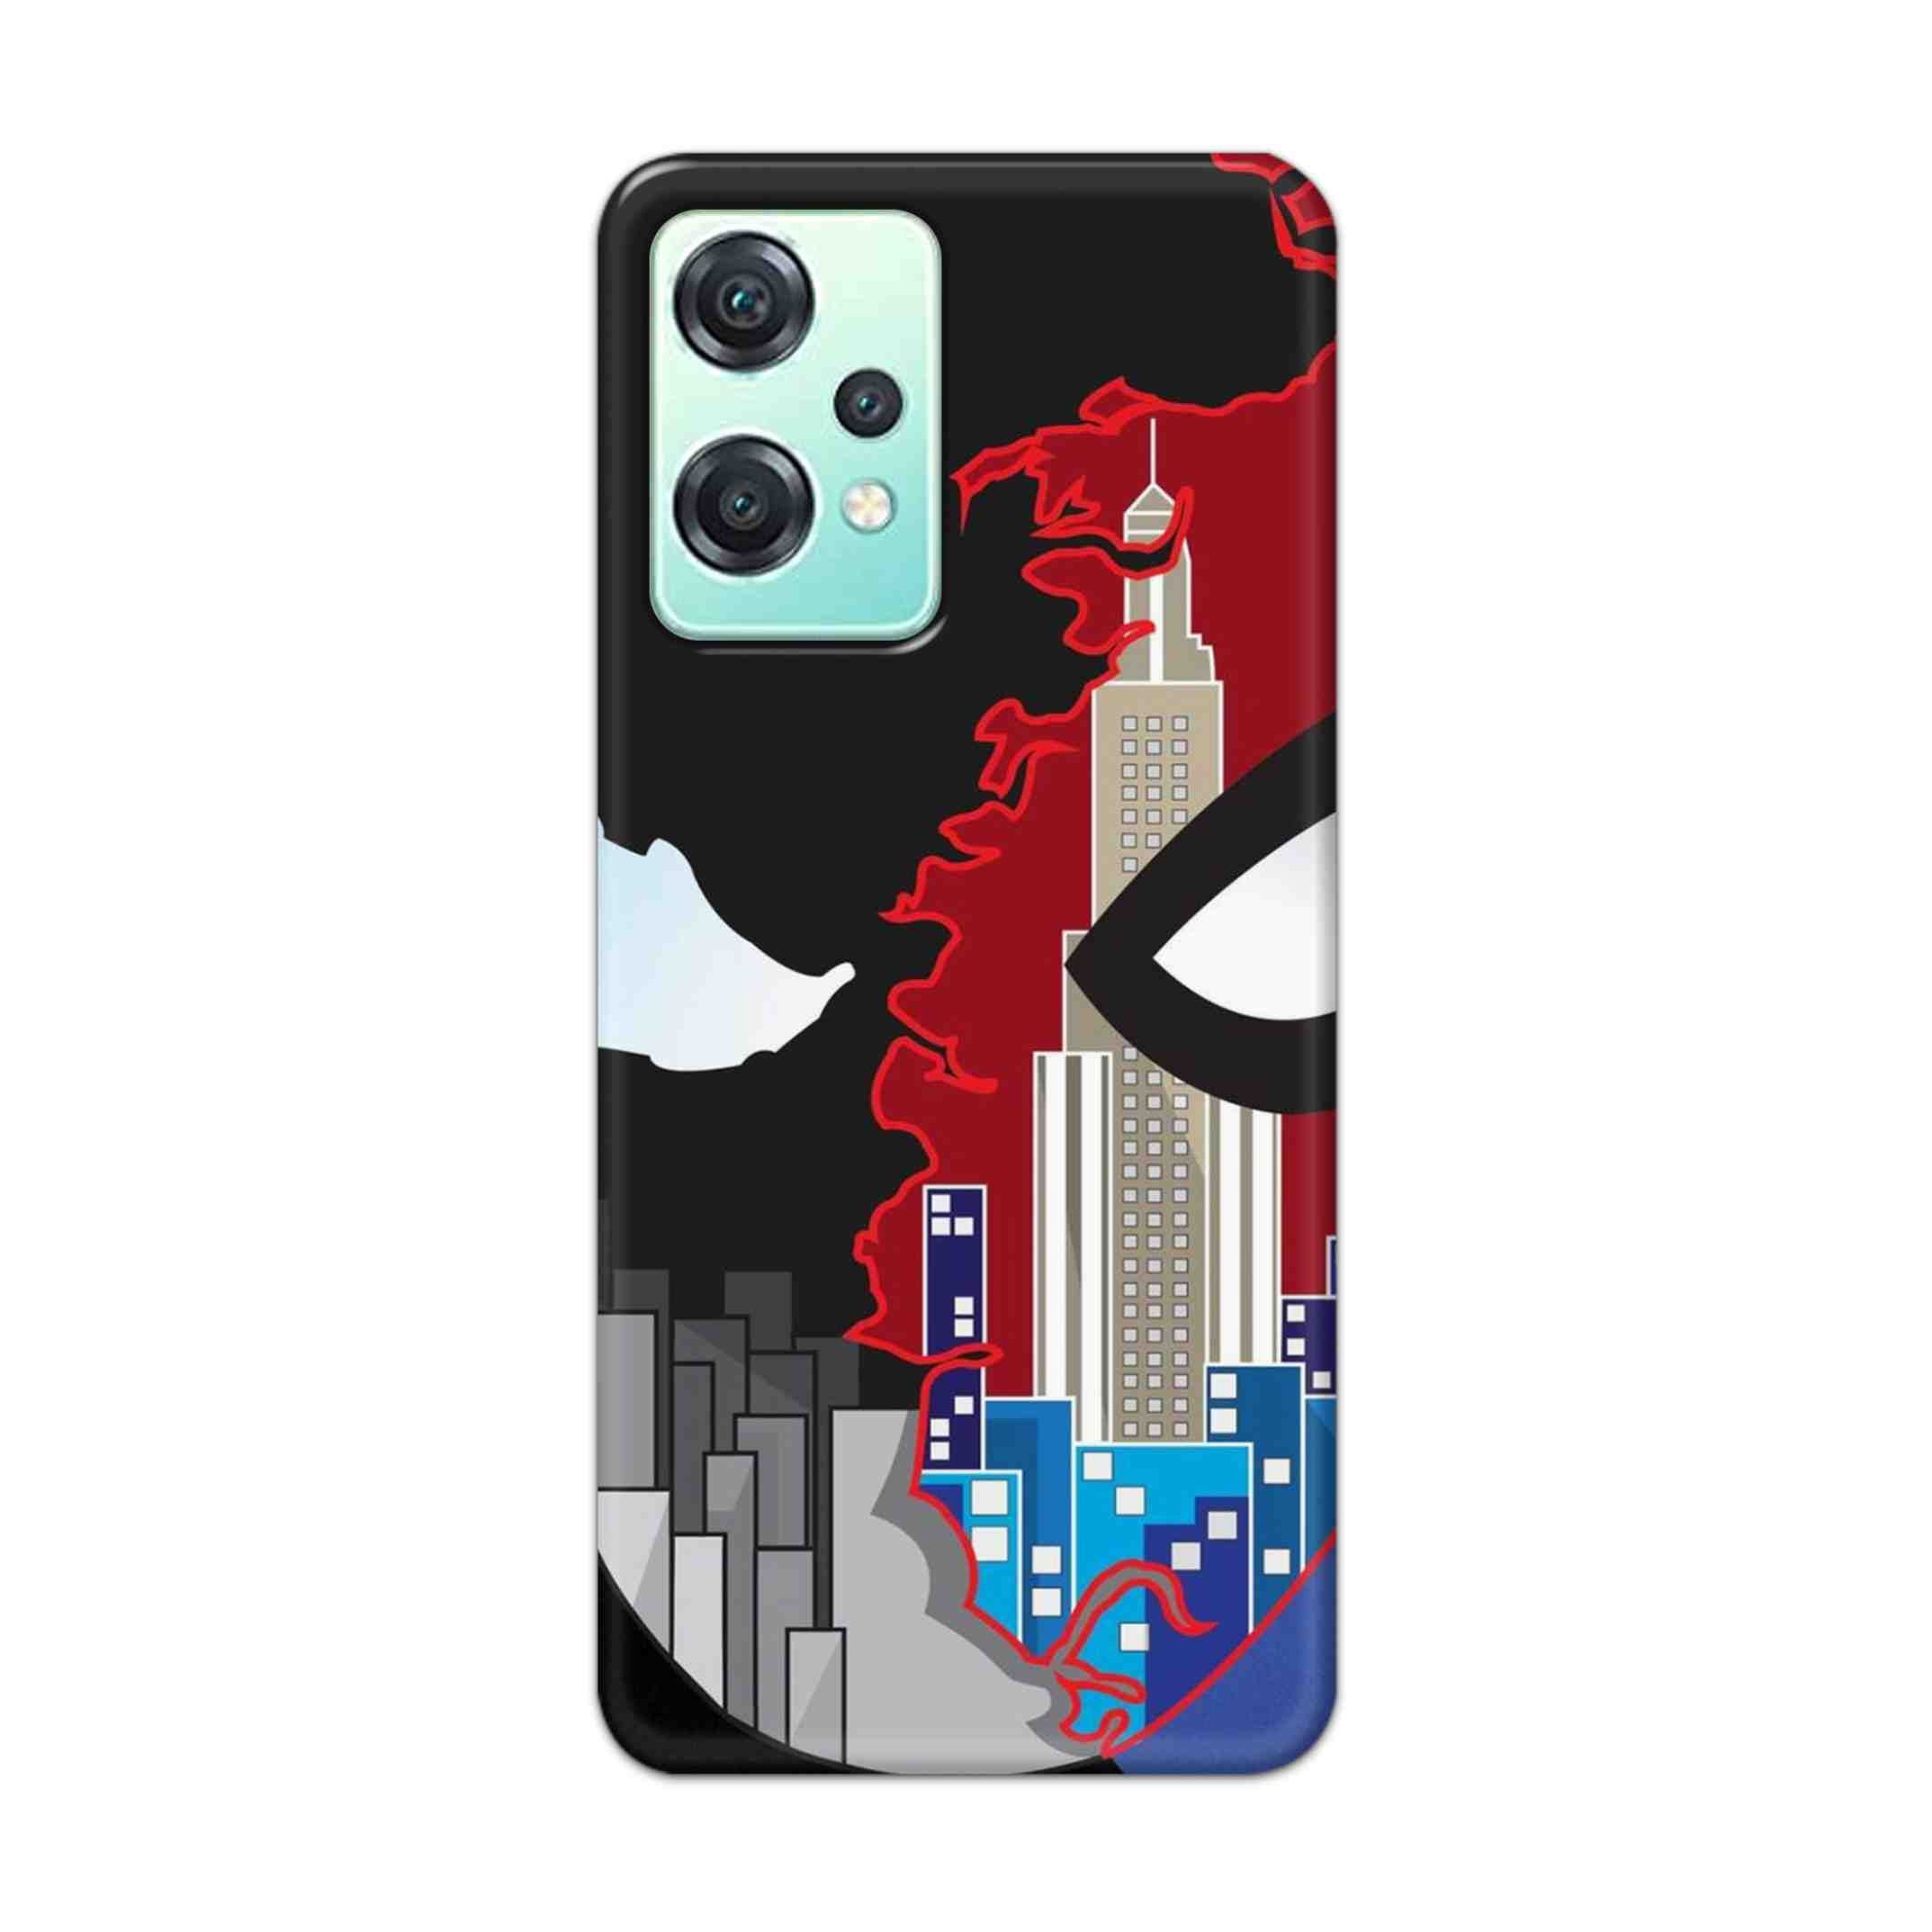 Buy Red And Black Spiderman Hard Back Mobile Phone Case Cover For OnePlus Nord CE 2 Lite 5G Online